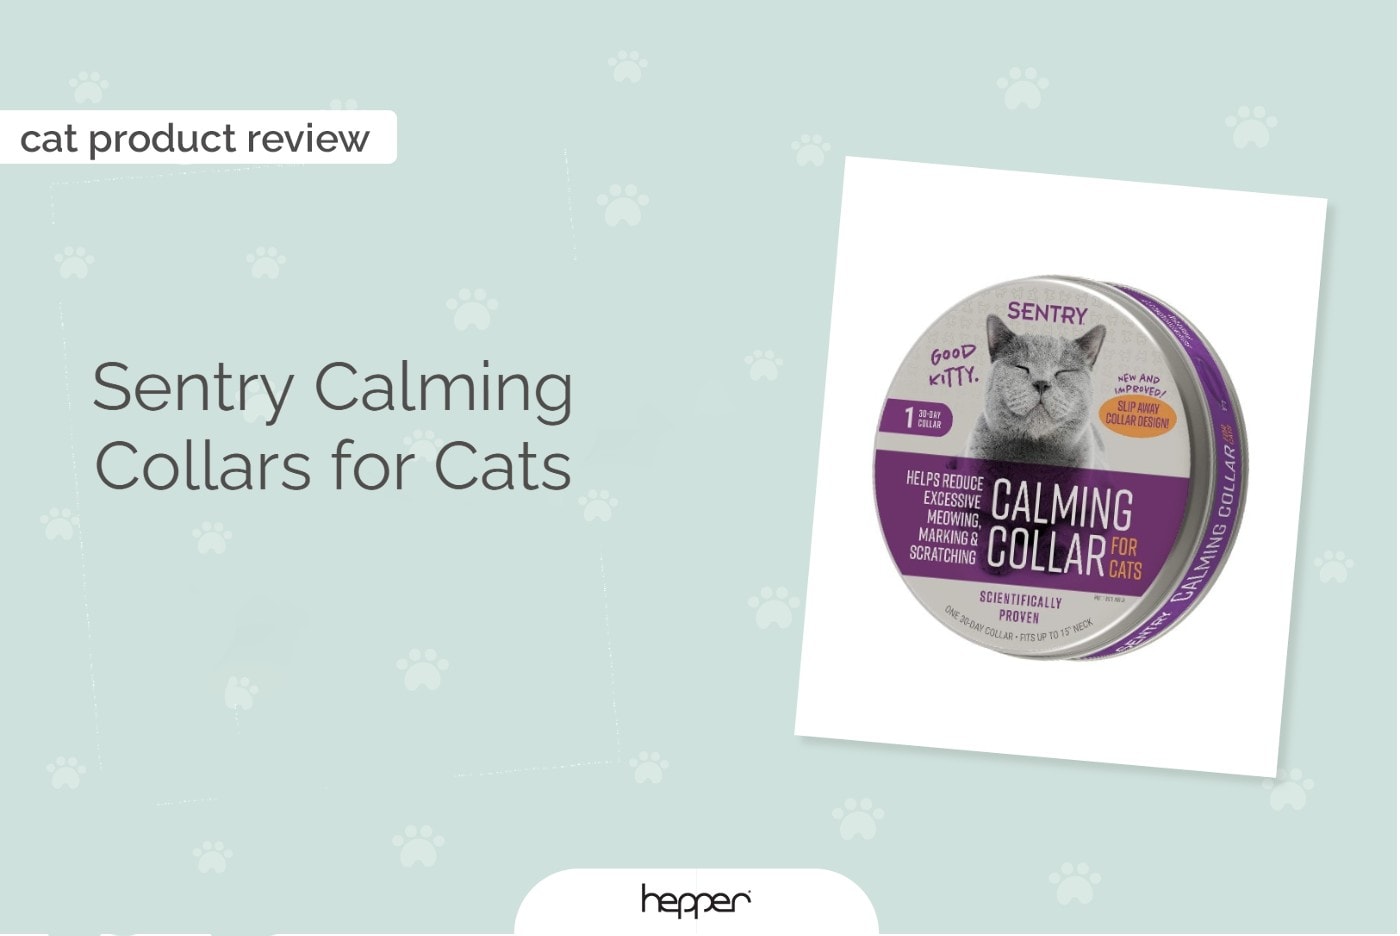 Sentry Calming Collars for Cats